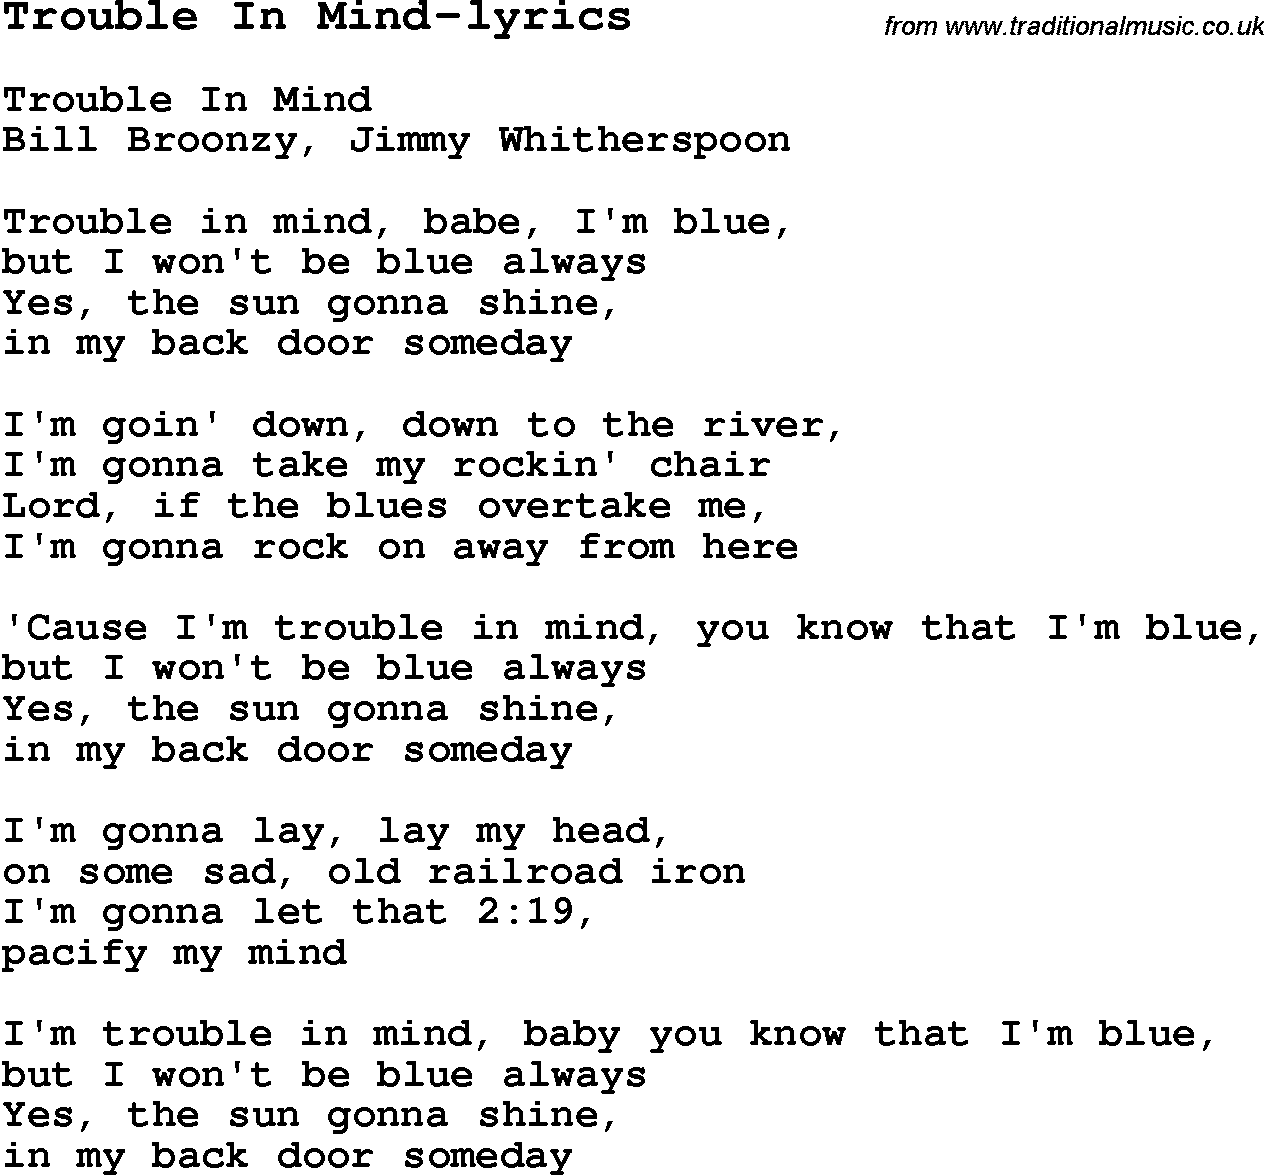 Blues Guitar Song, lyrics, chords, tablature, playing hints for Trouble In Mind-lyrics